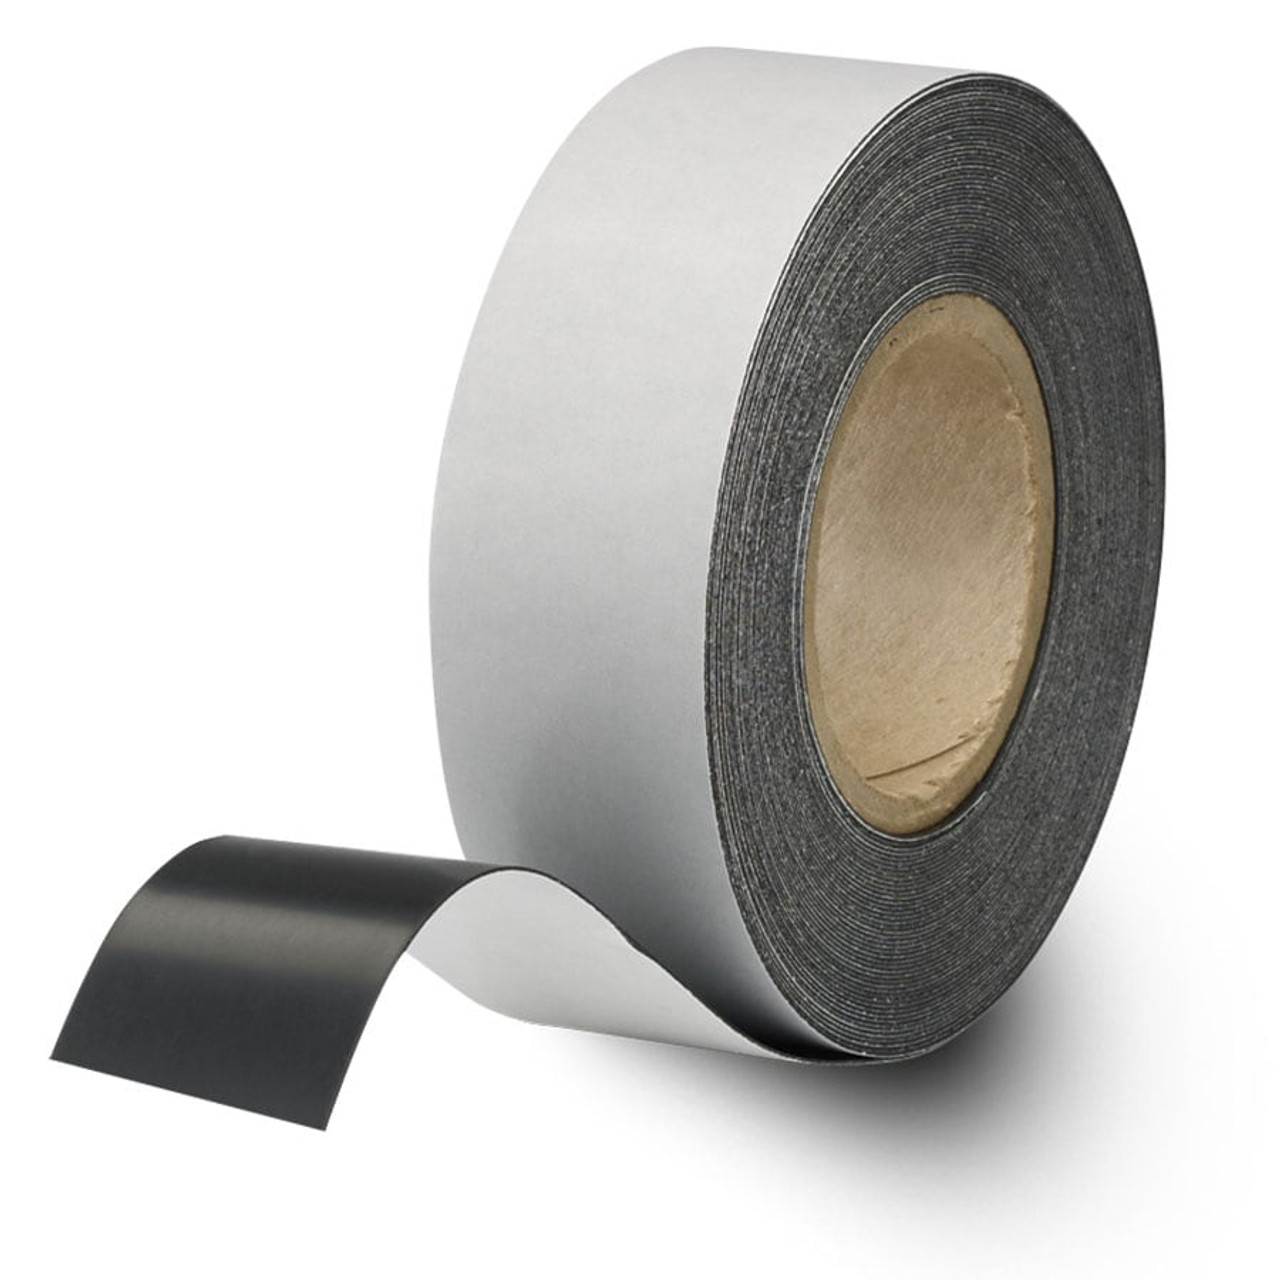 1 In. x 100 Ft. Magnetic Strip